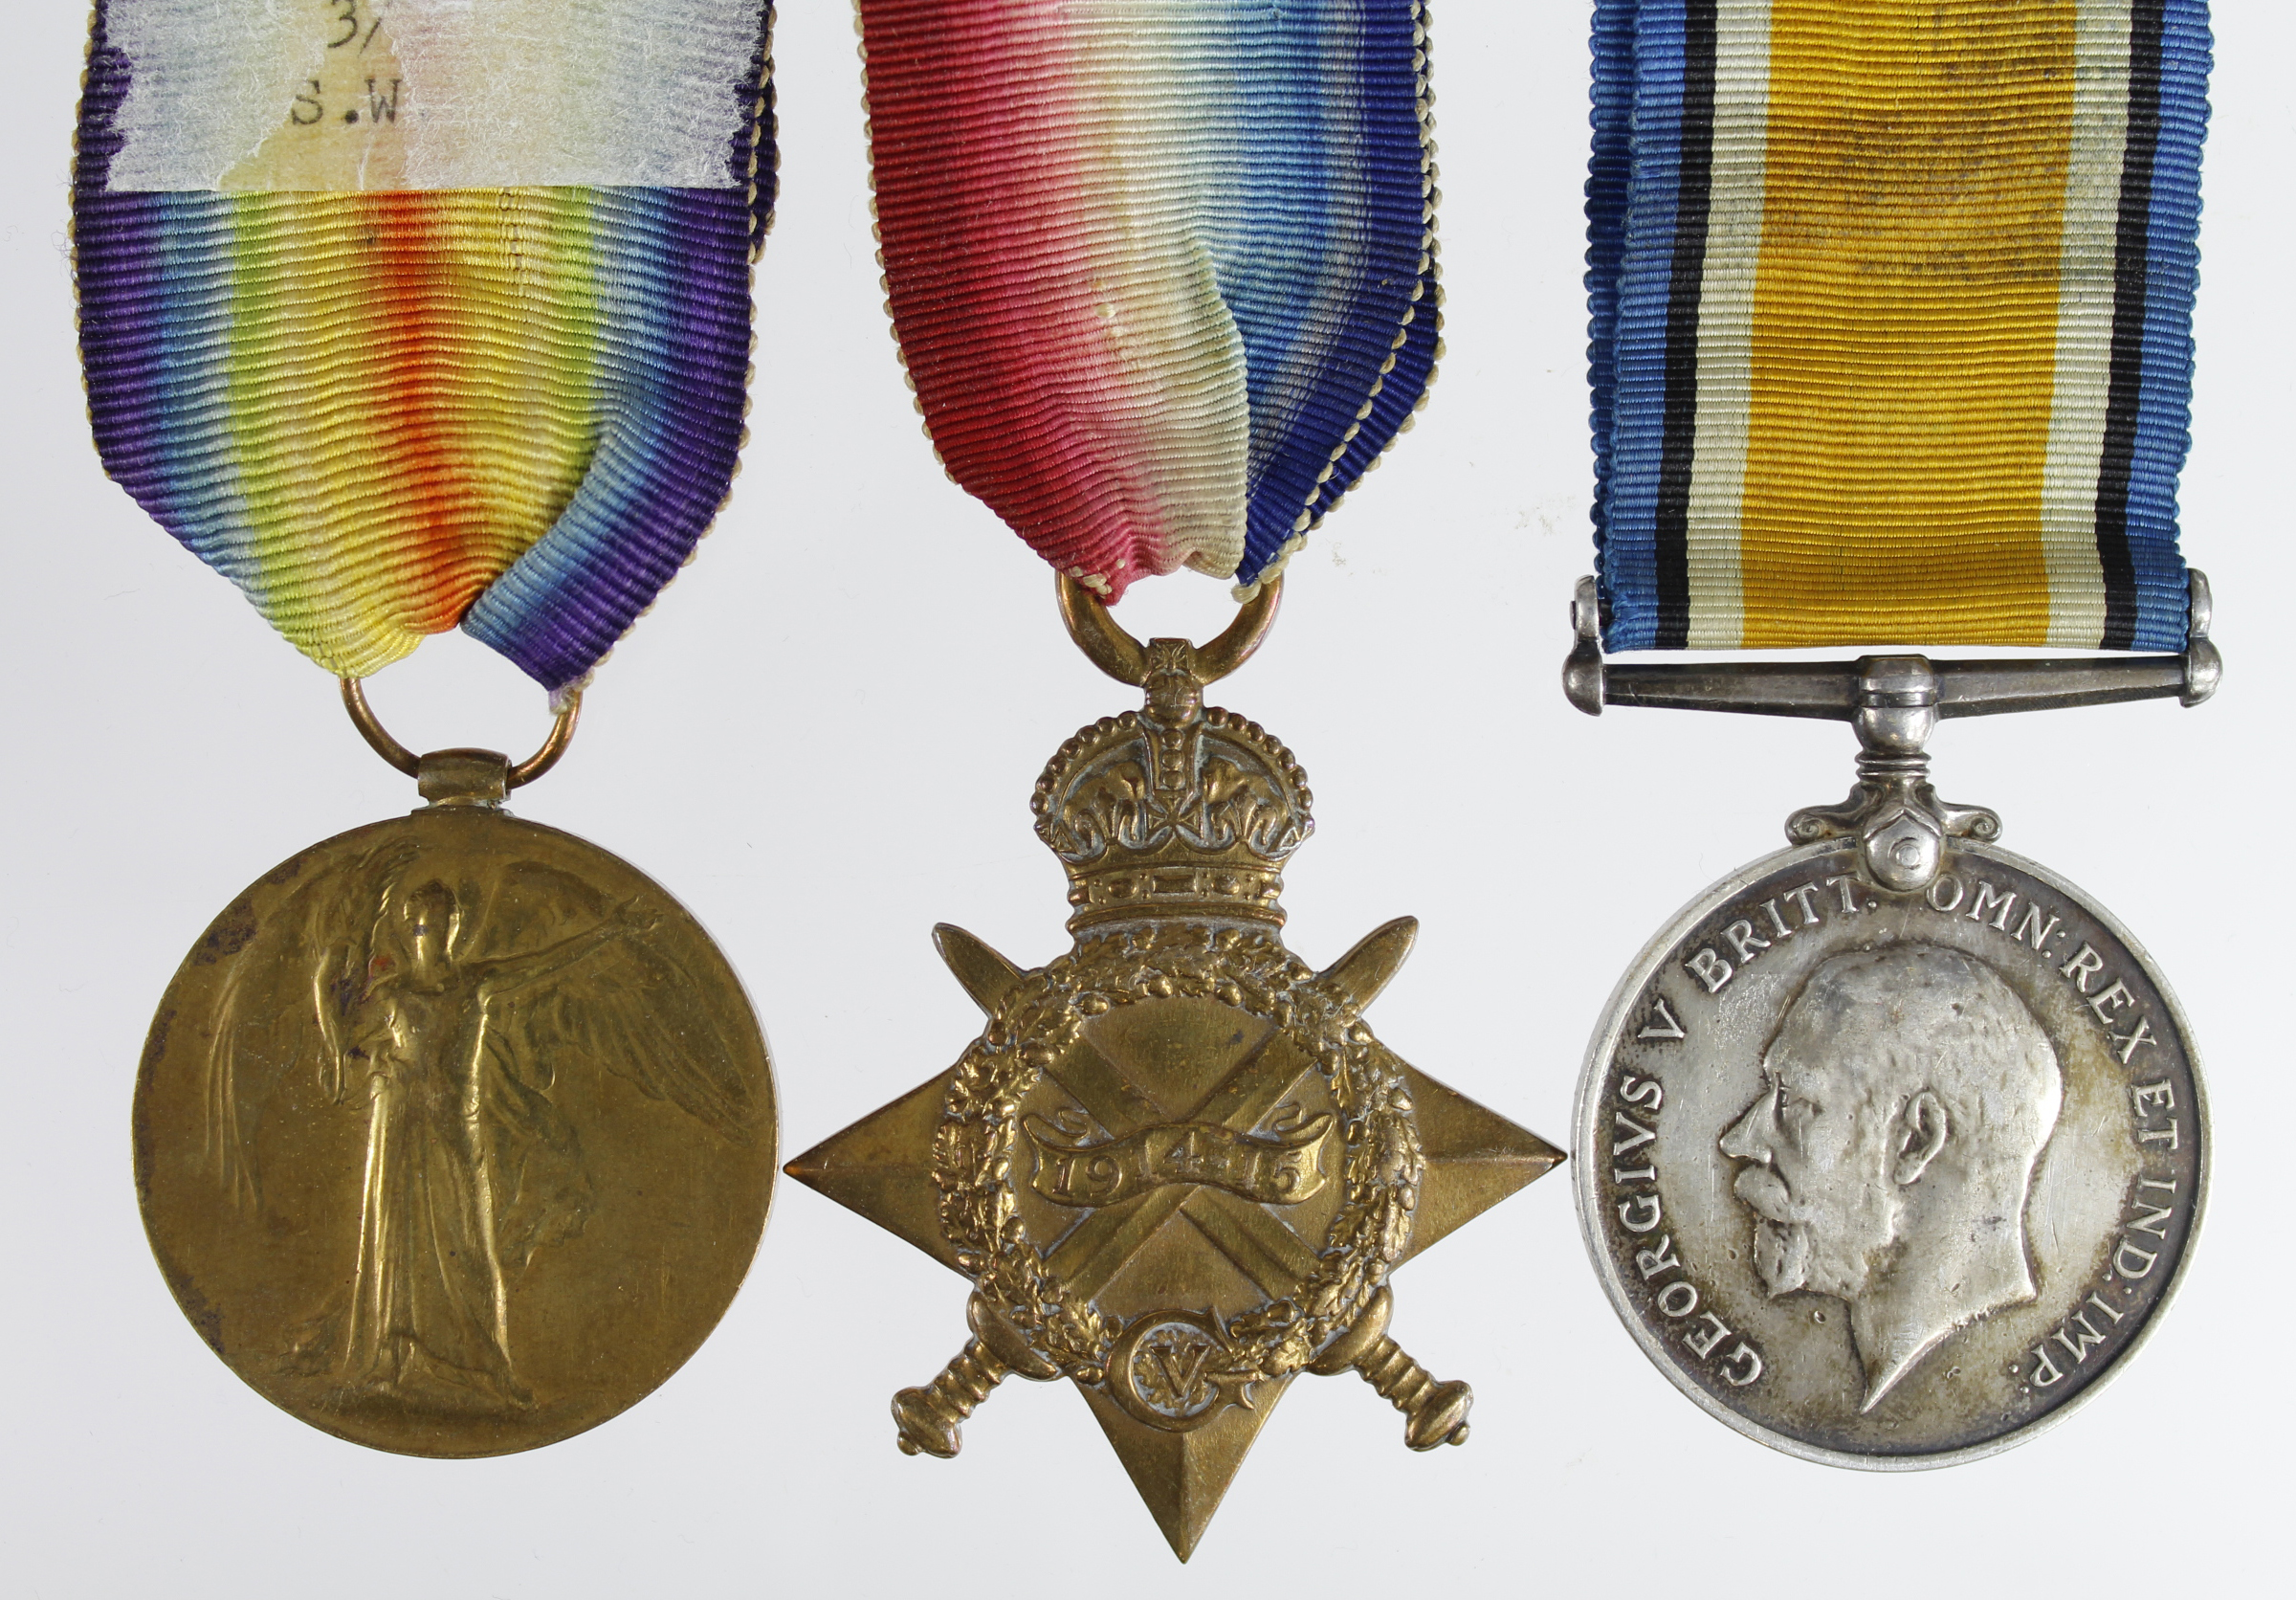 1915 Star Trio to 11135 Pte C C J George R.War. Rgt. Served with 2nd Bn. Entitled to a Silver War